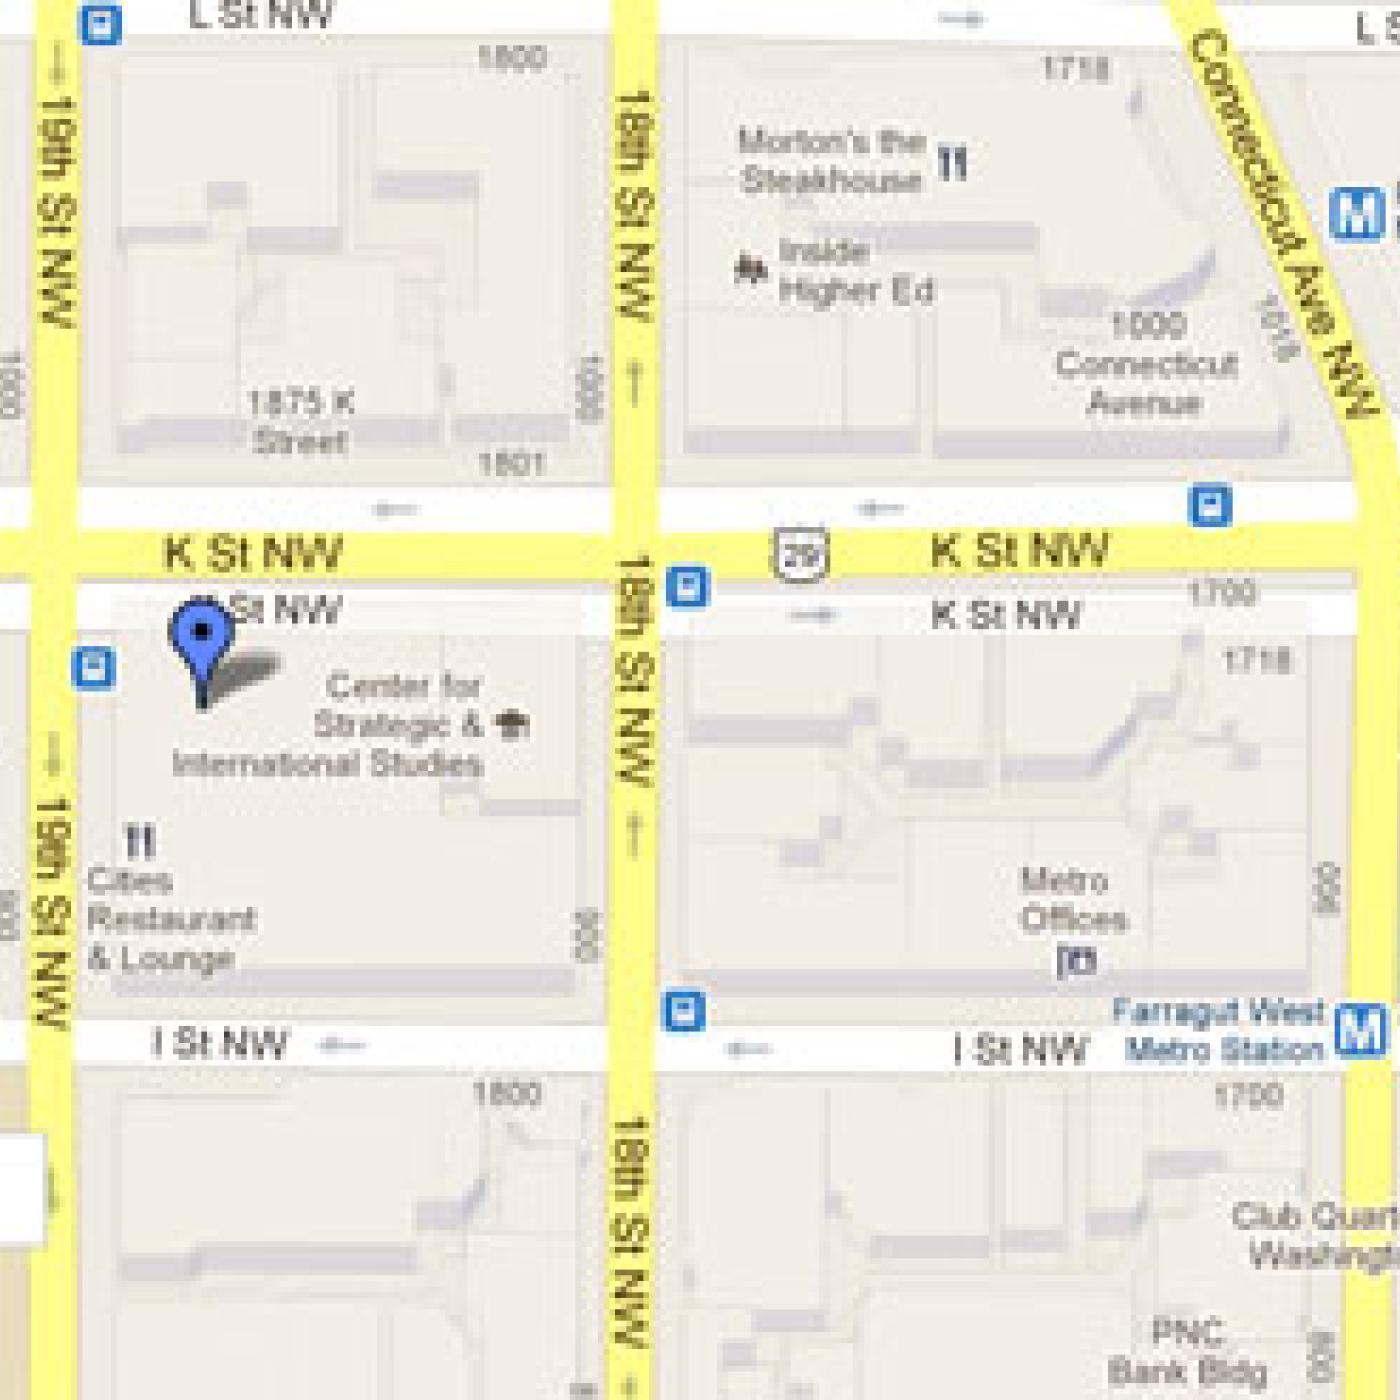 Directions to IFES using Google Maps